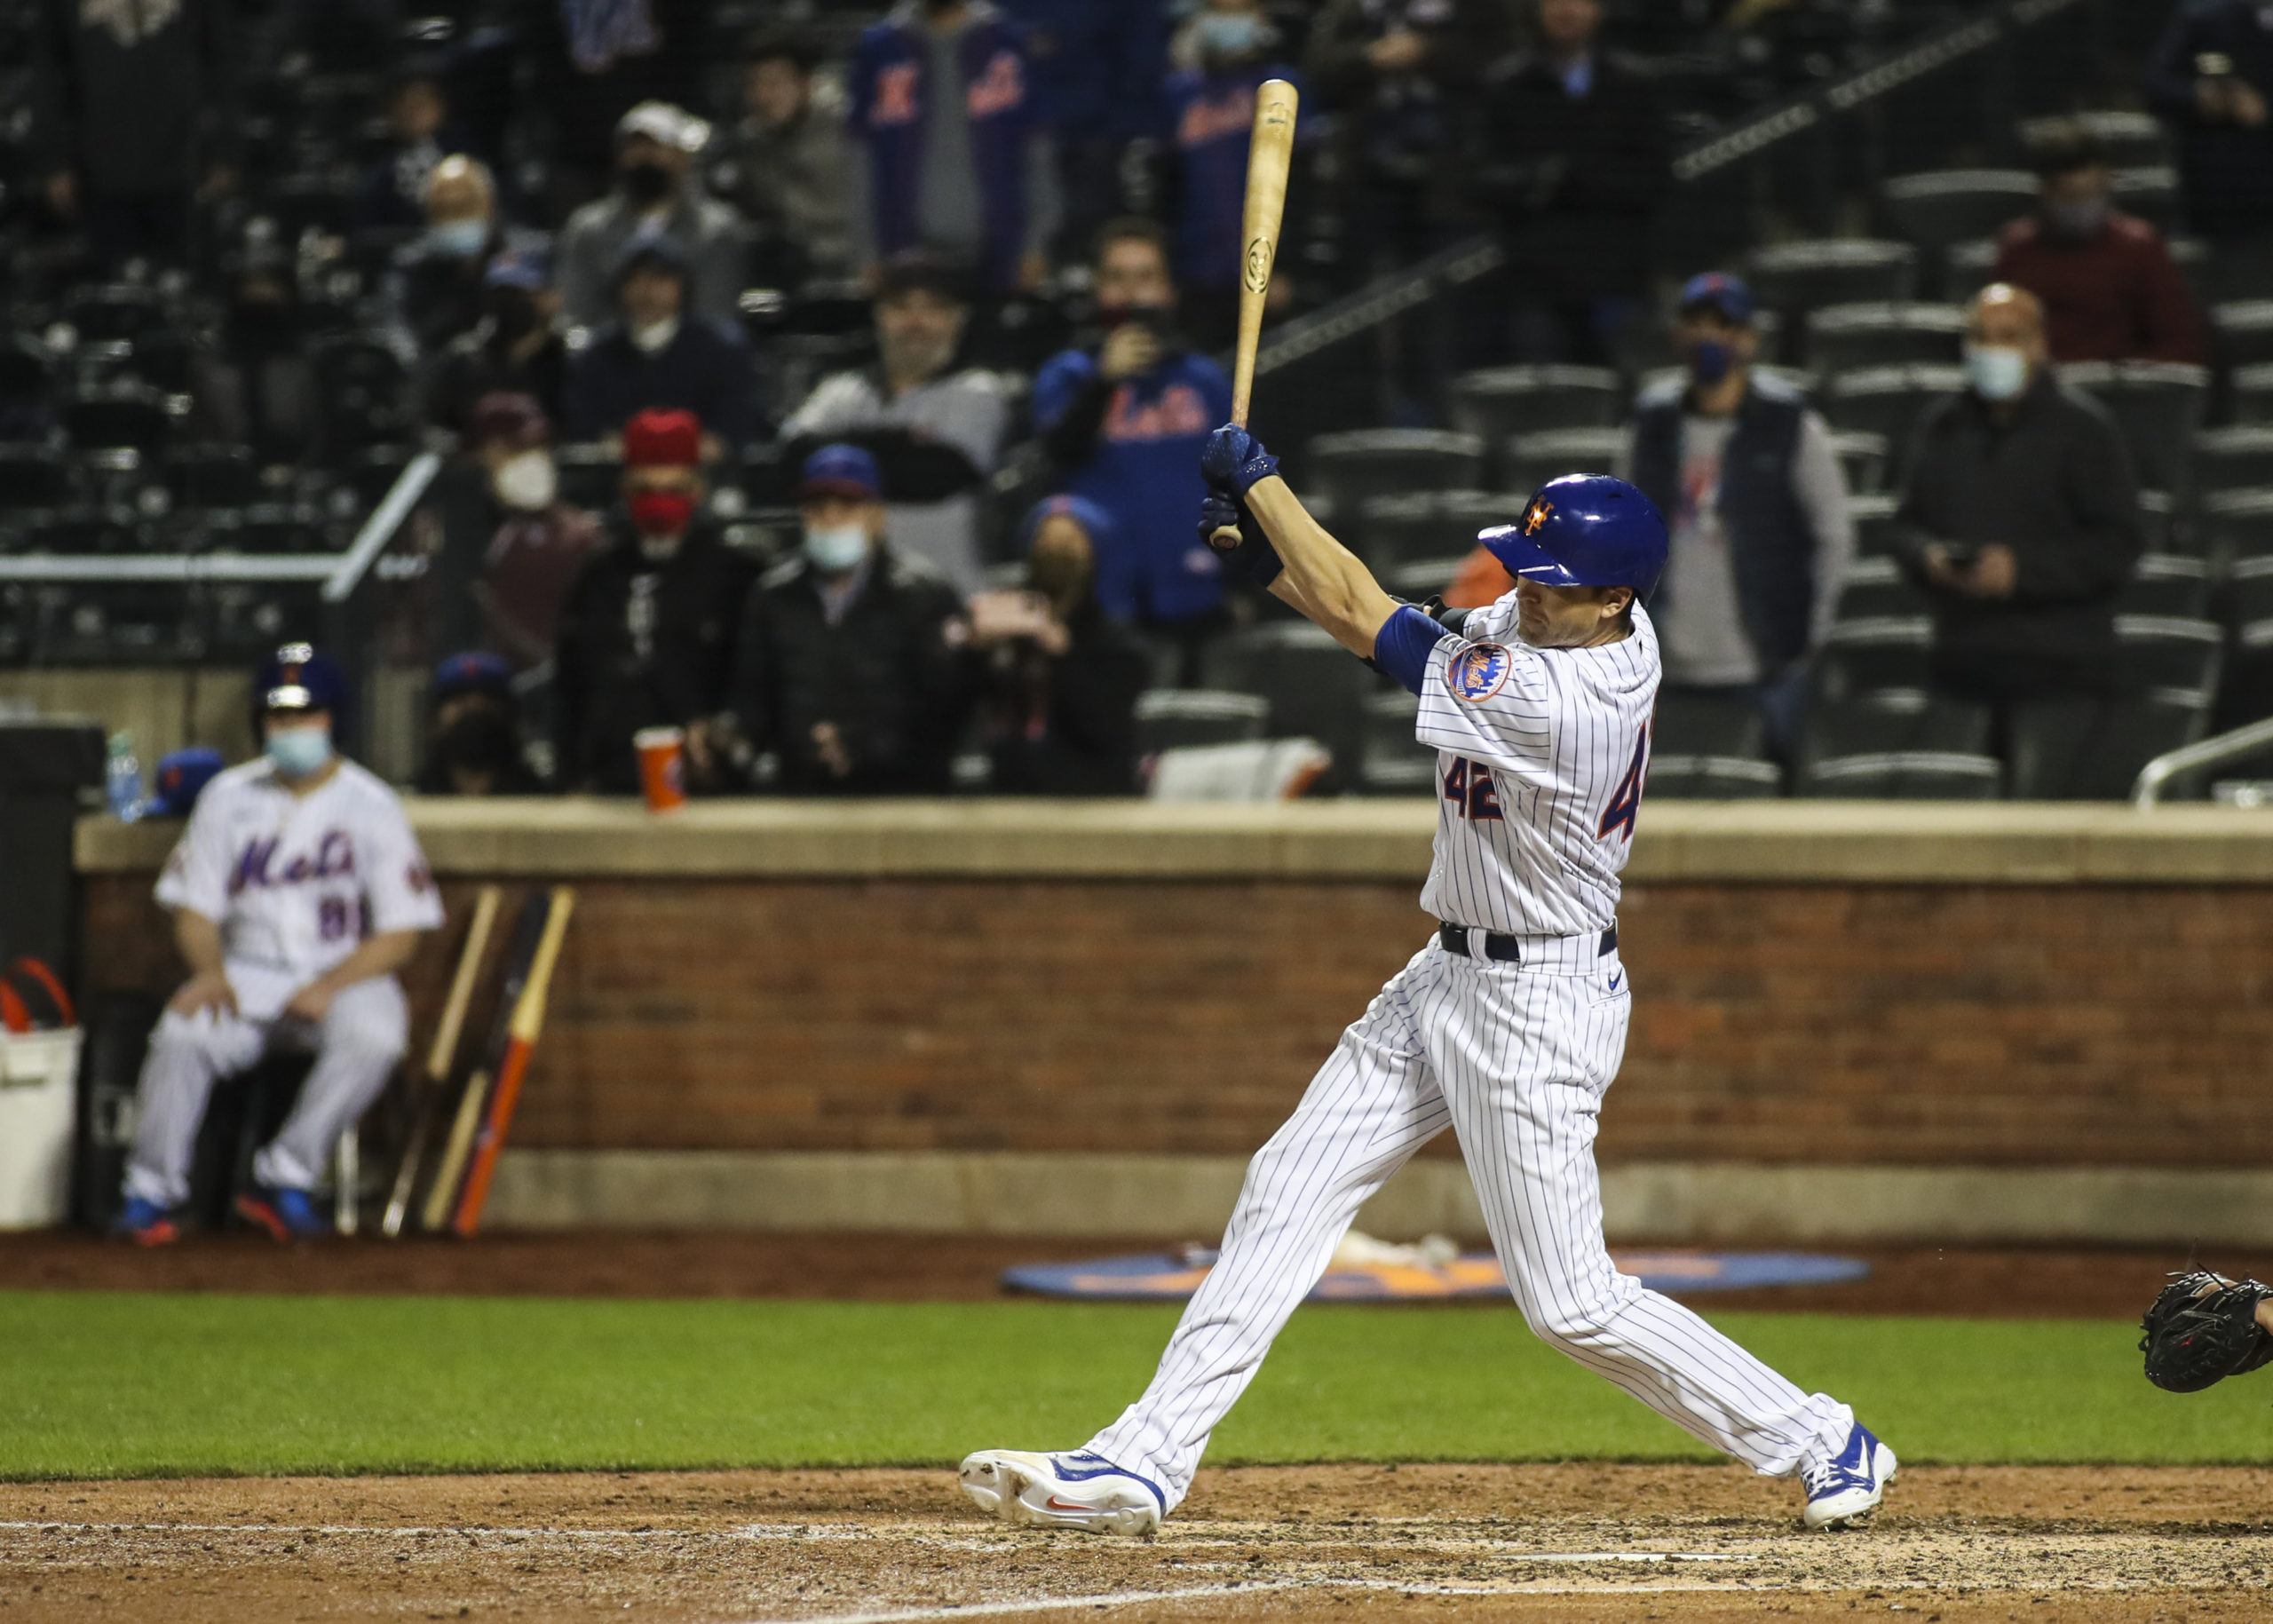 New York Mets pitcher Jacob deGrom hits a single in the eighth inning against the Washington Nationals MLB